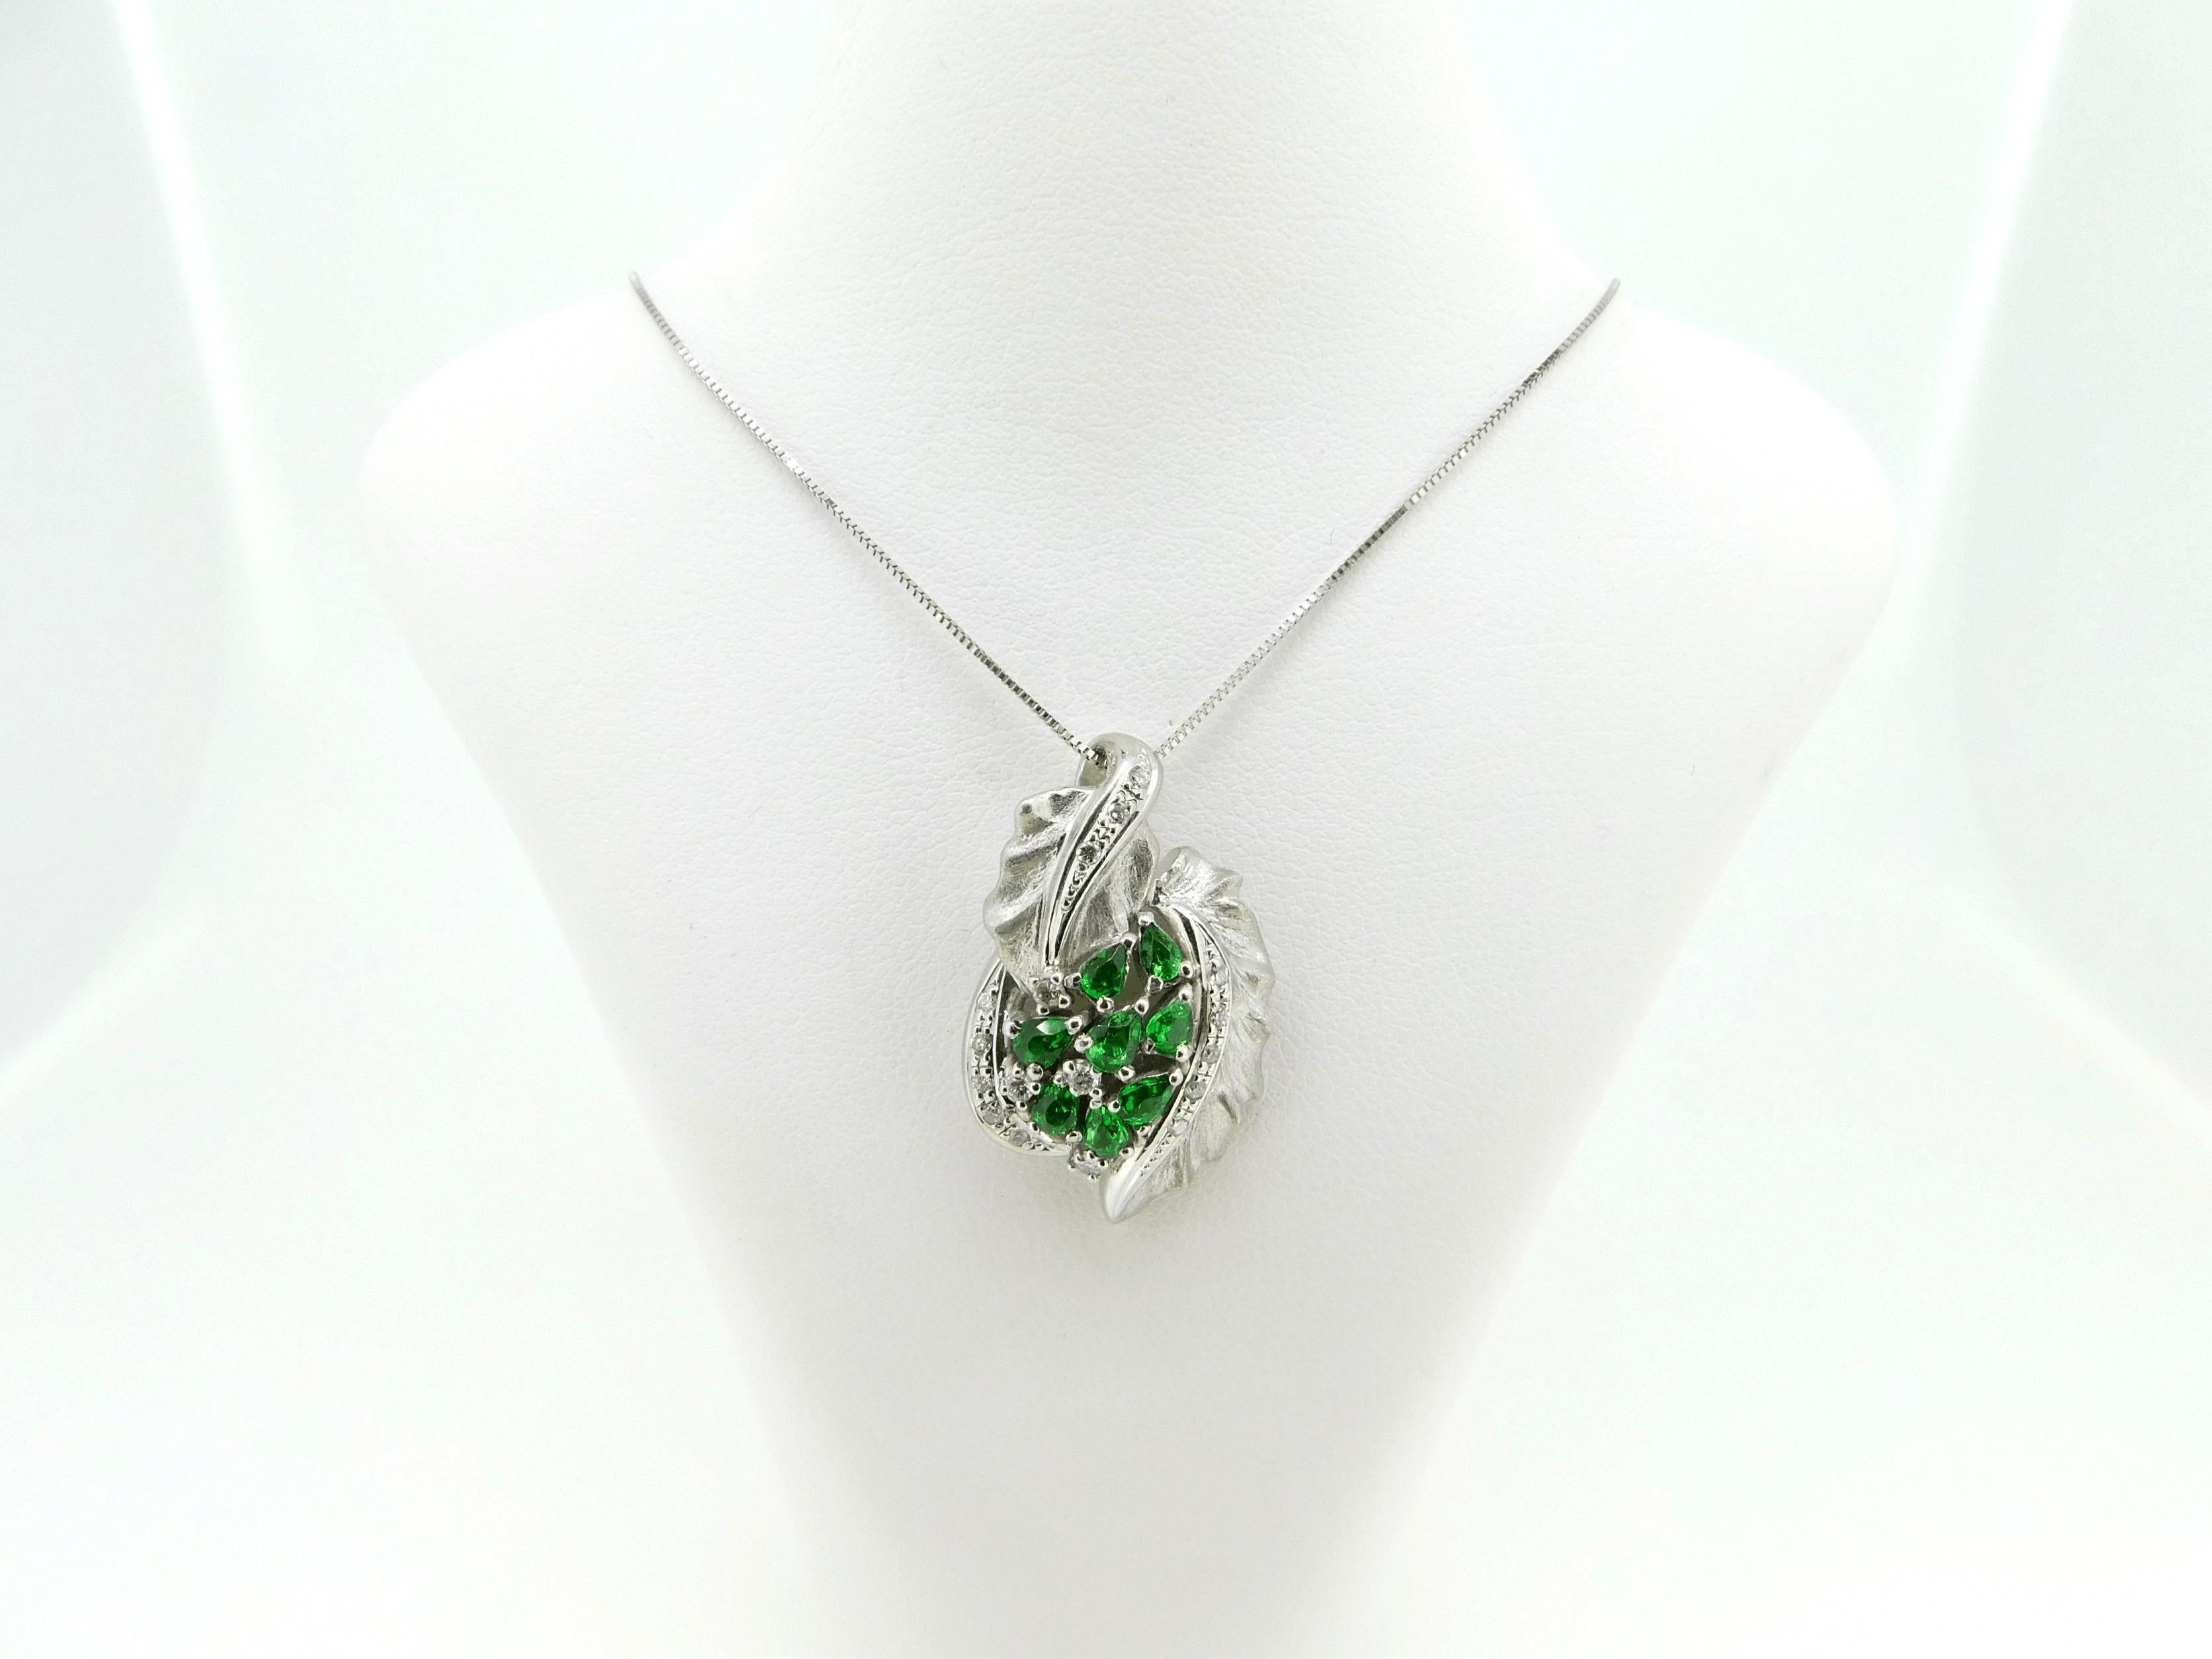 Platinum 3.50ct Genuine Natural Tsavorite Garnet and Diamond Pendant (#J4374)

Platinum tsavorite garnet and diamond leaf pendant with 14k chain. There are eight pear shape tsavorite garnets weighing 3.5 carats total. The garnets have fine grass